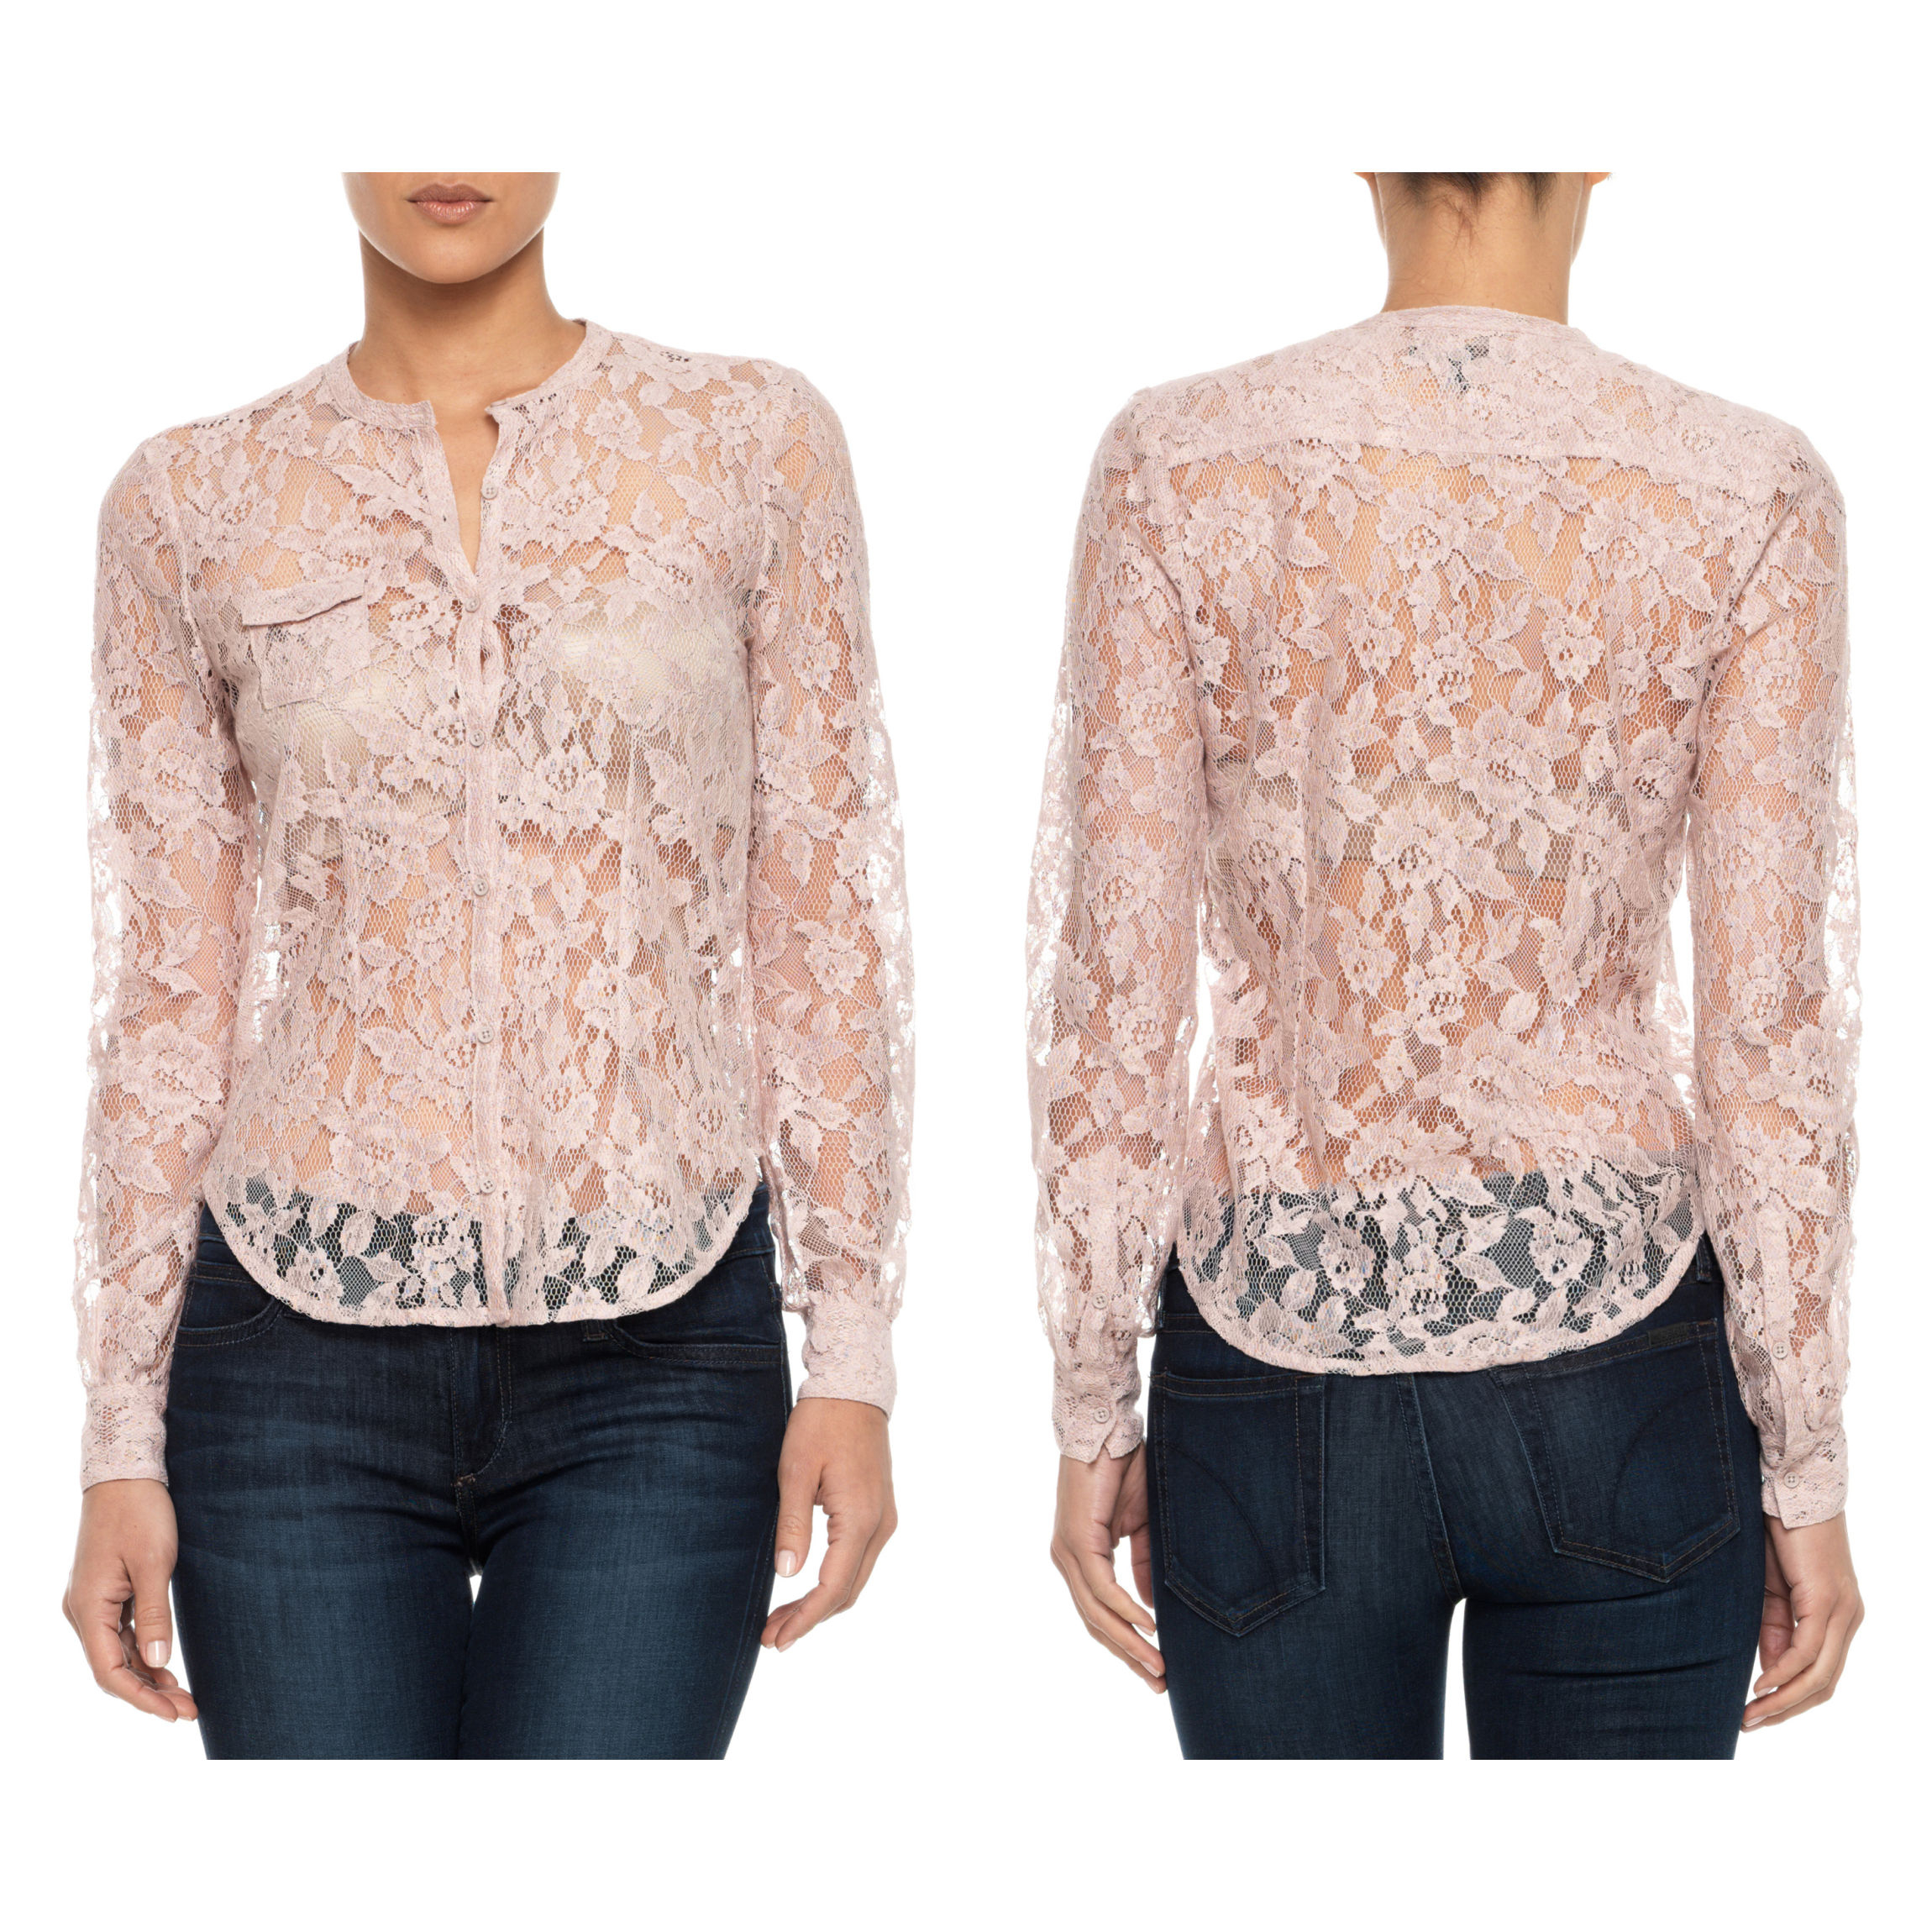 Images of Pink Lace Blouse - Reikian